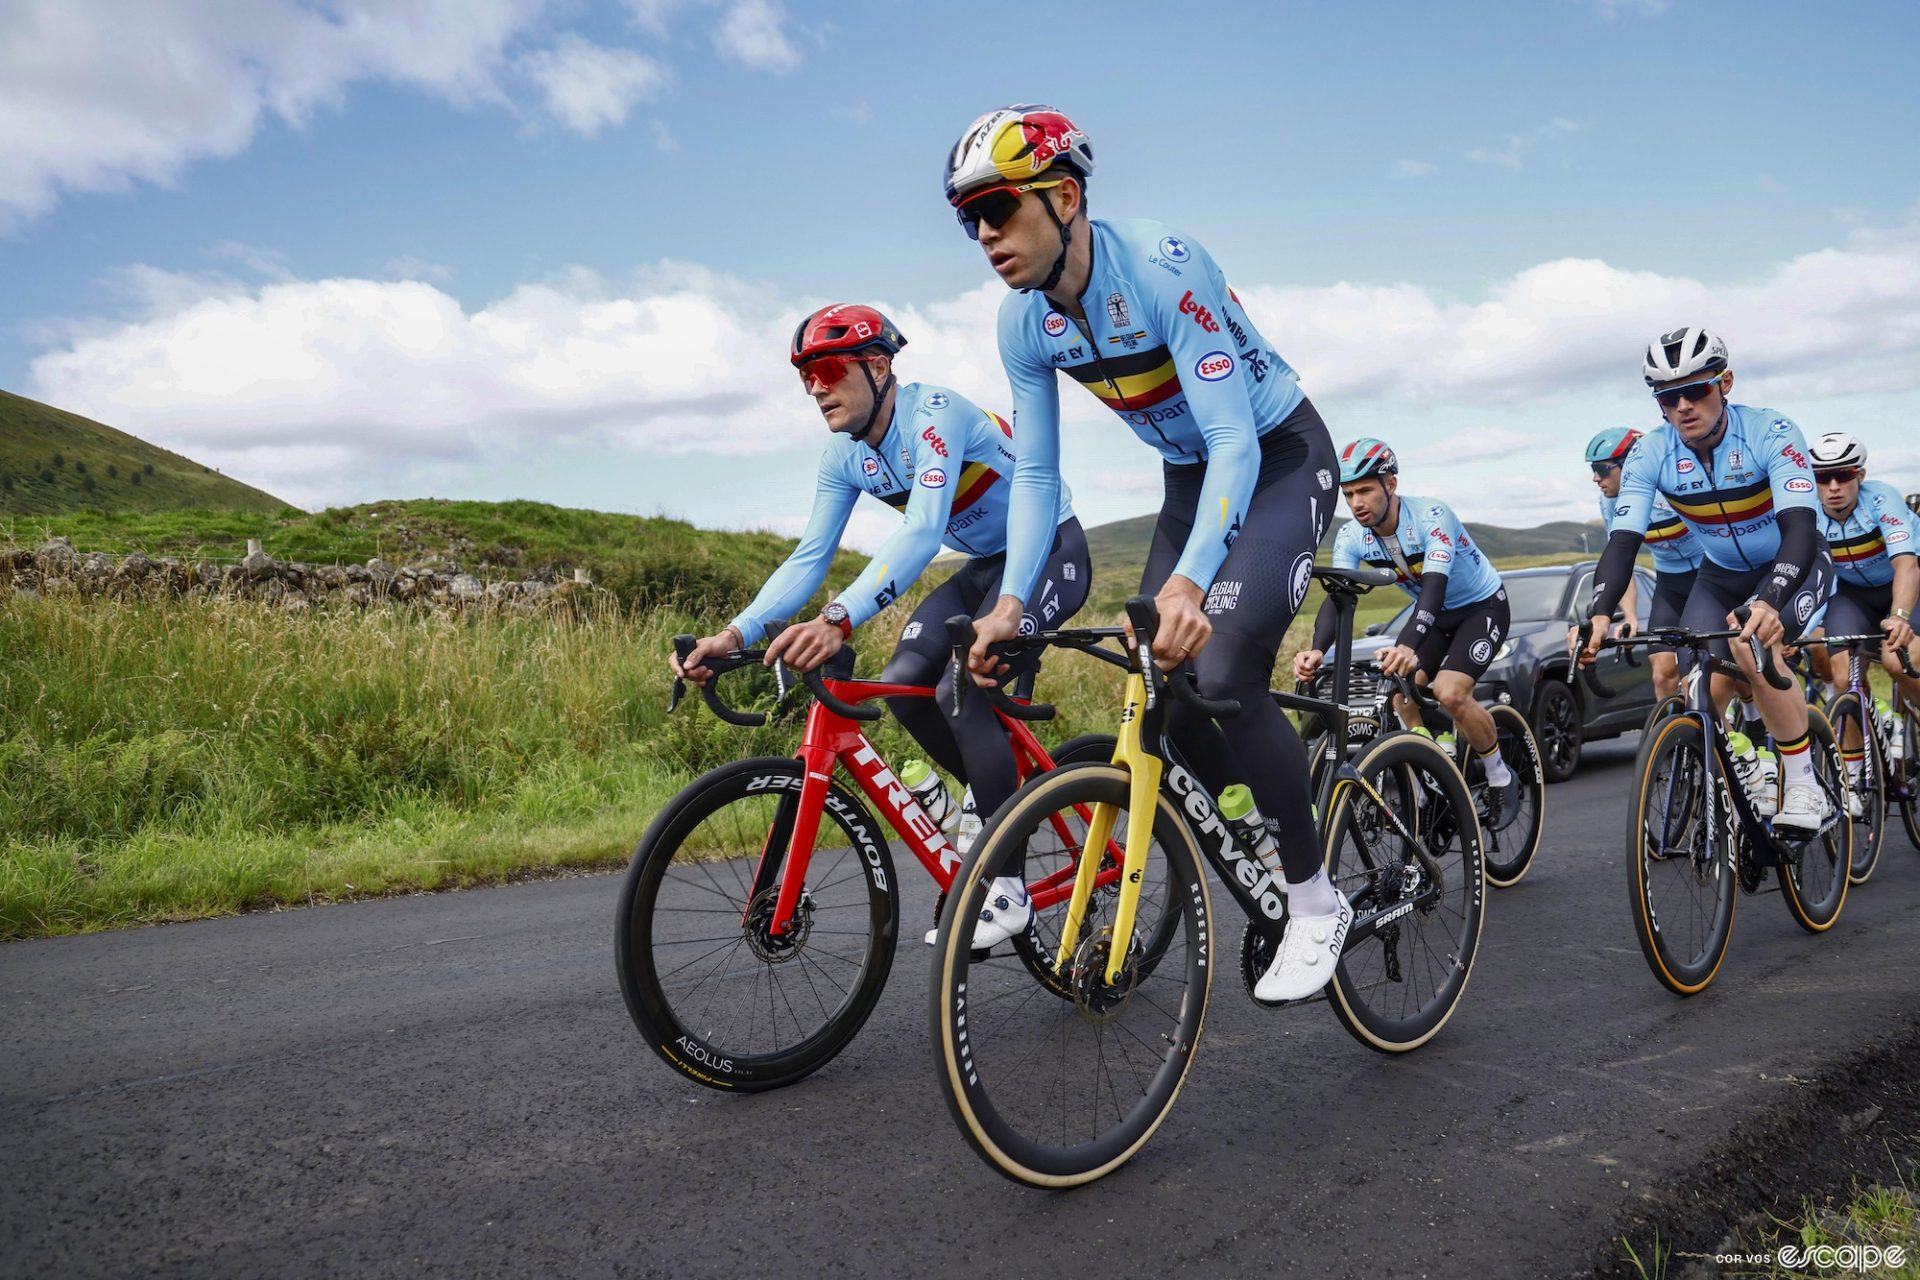 The Belgian men's road race team out for a training ride on the road course in Scotland. Wout van Aert leads, riding next to Jasper Stuyven. Victor Campanaerts and Yves Lampaerts follow behind.